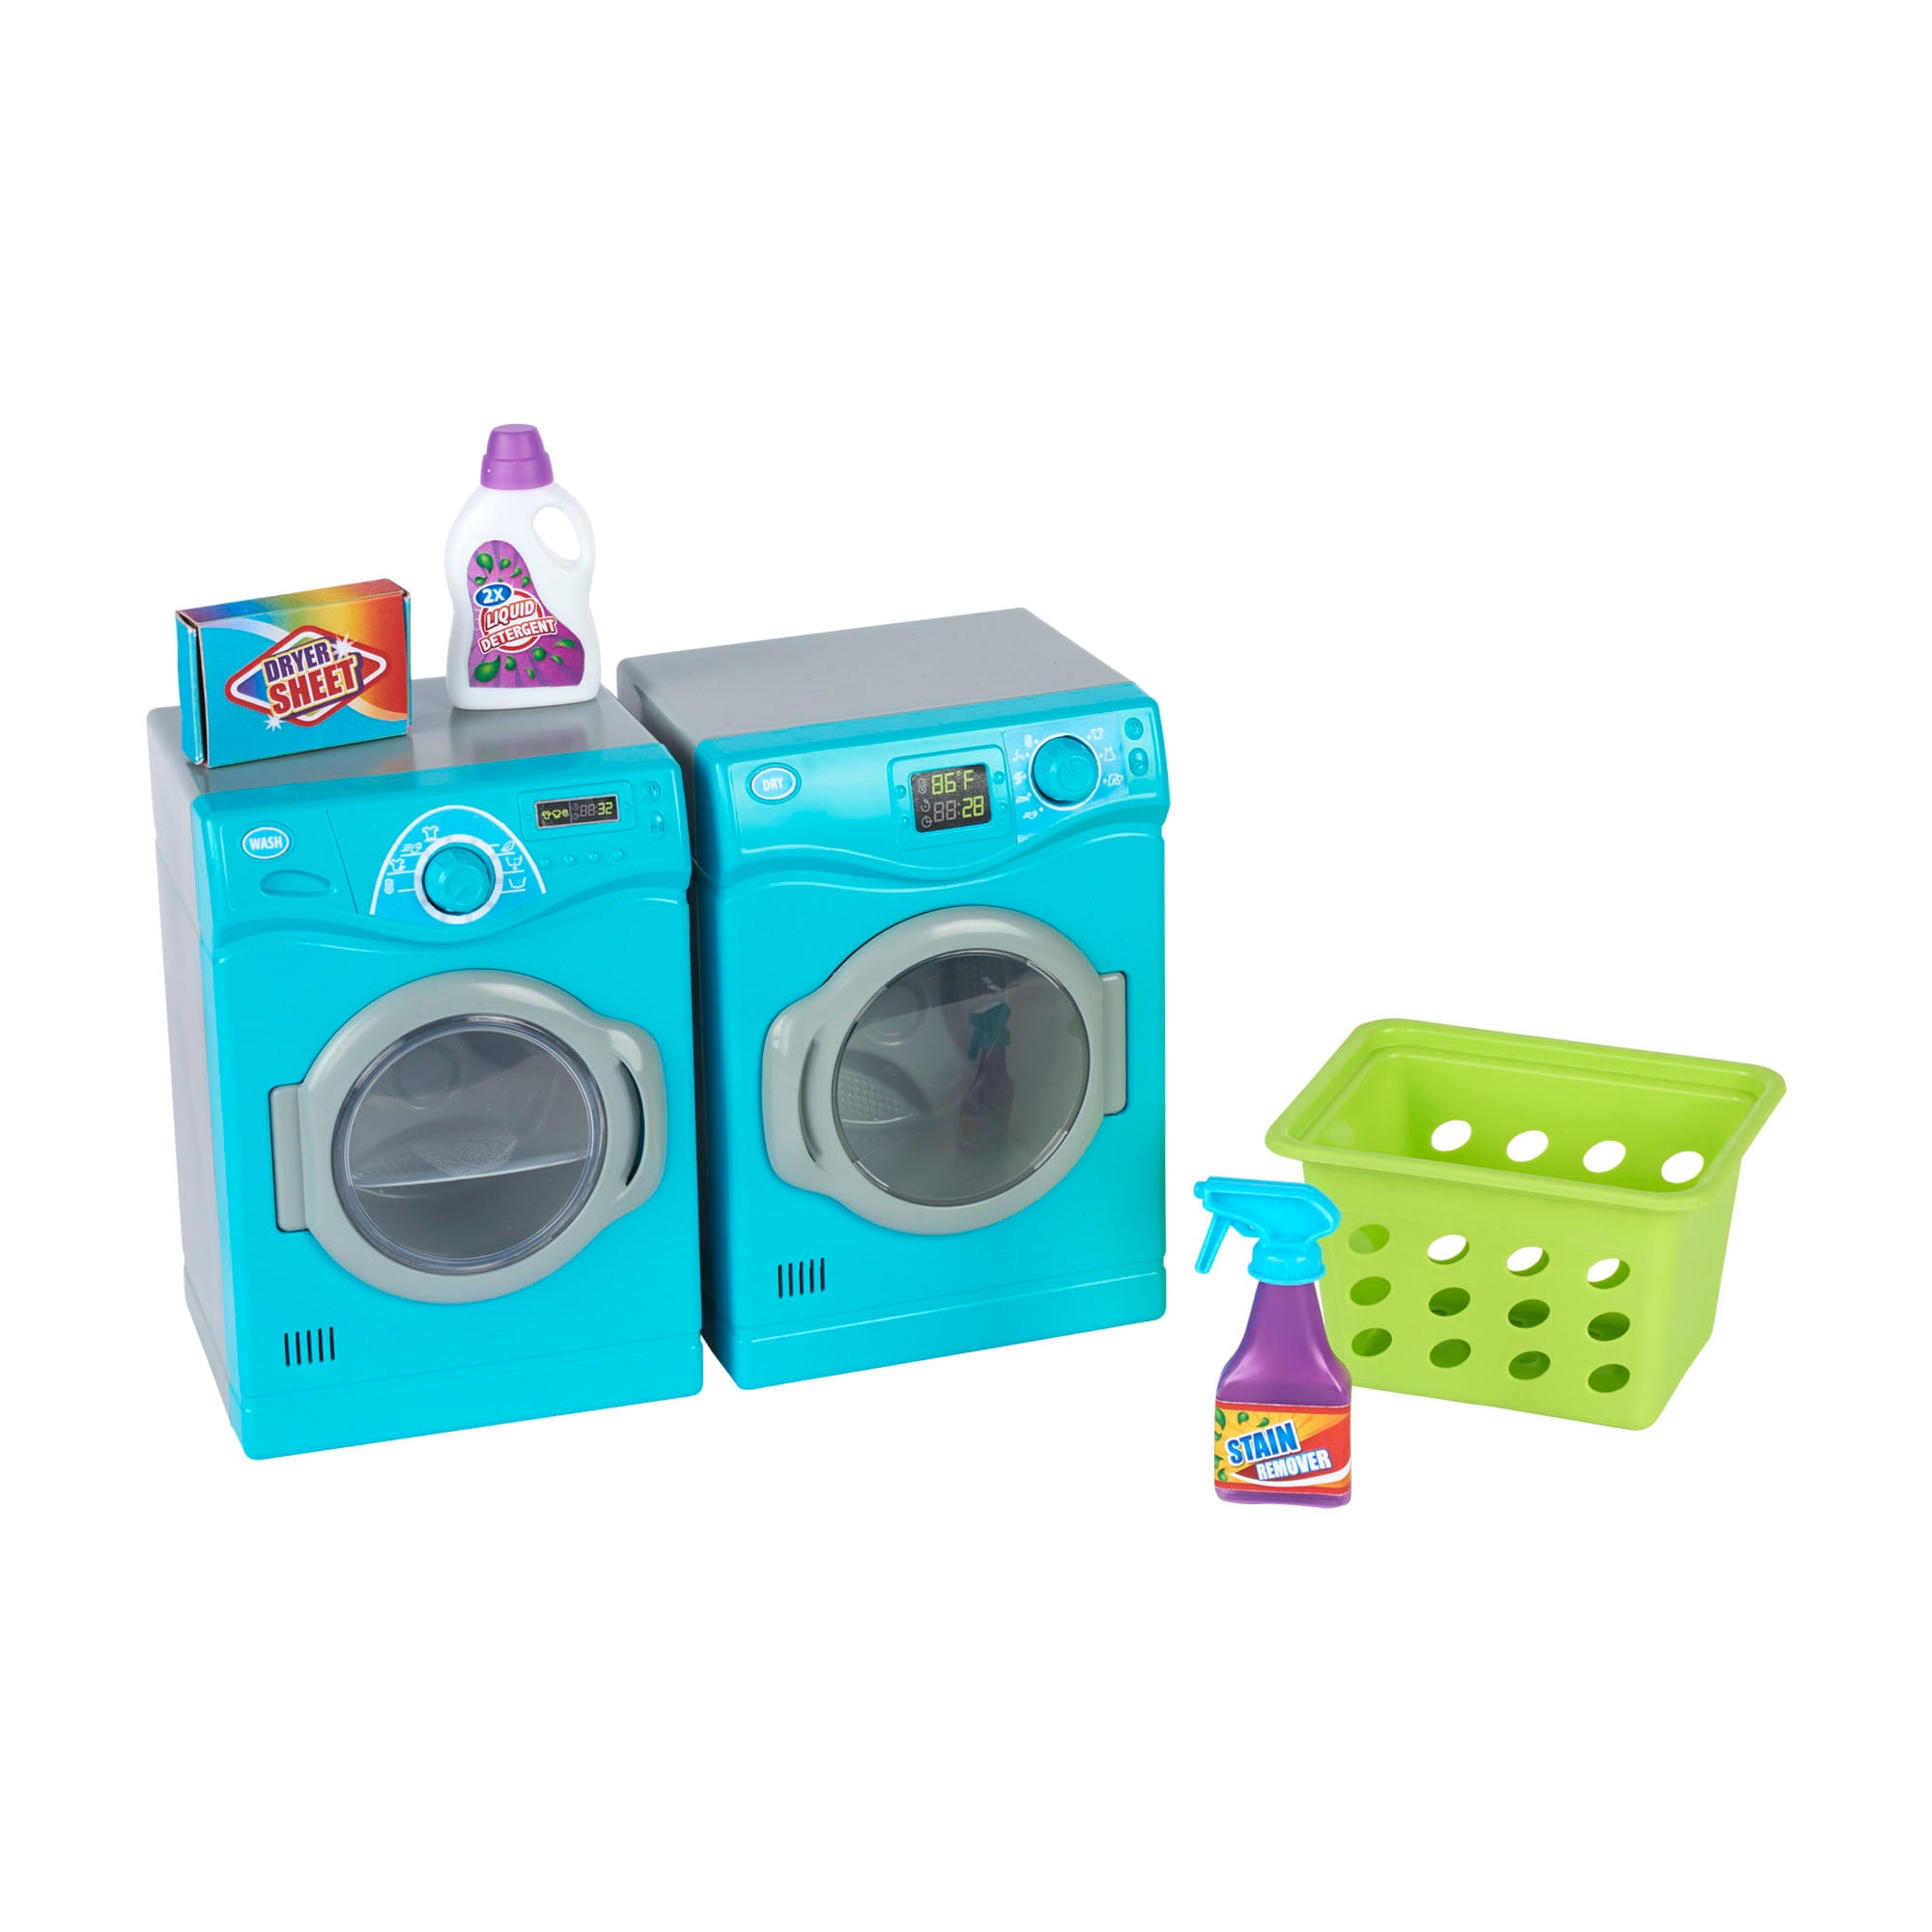 toy washing machine and dryer that works